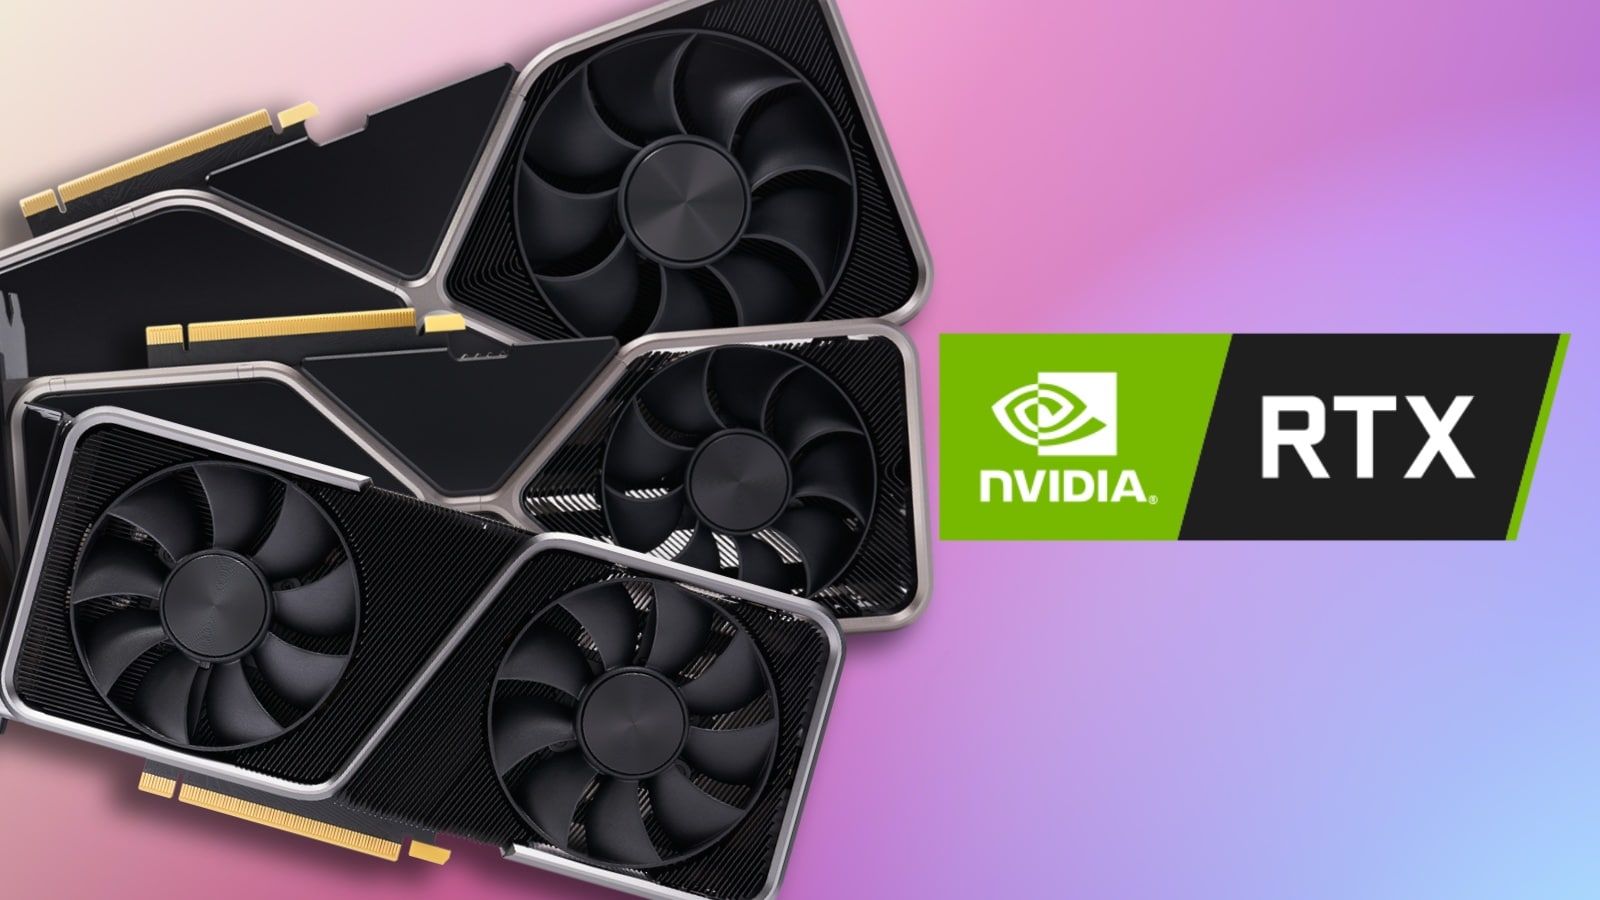 GeForce RTX 40 series graphics cards based on 3rd generation RTX architecture and NVIDIA DLSS 3: 4 times faster and better